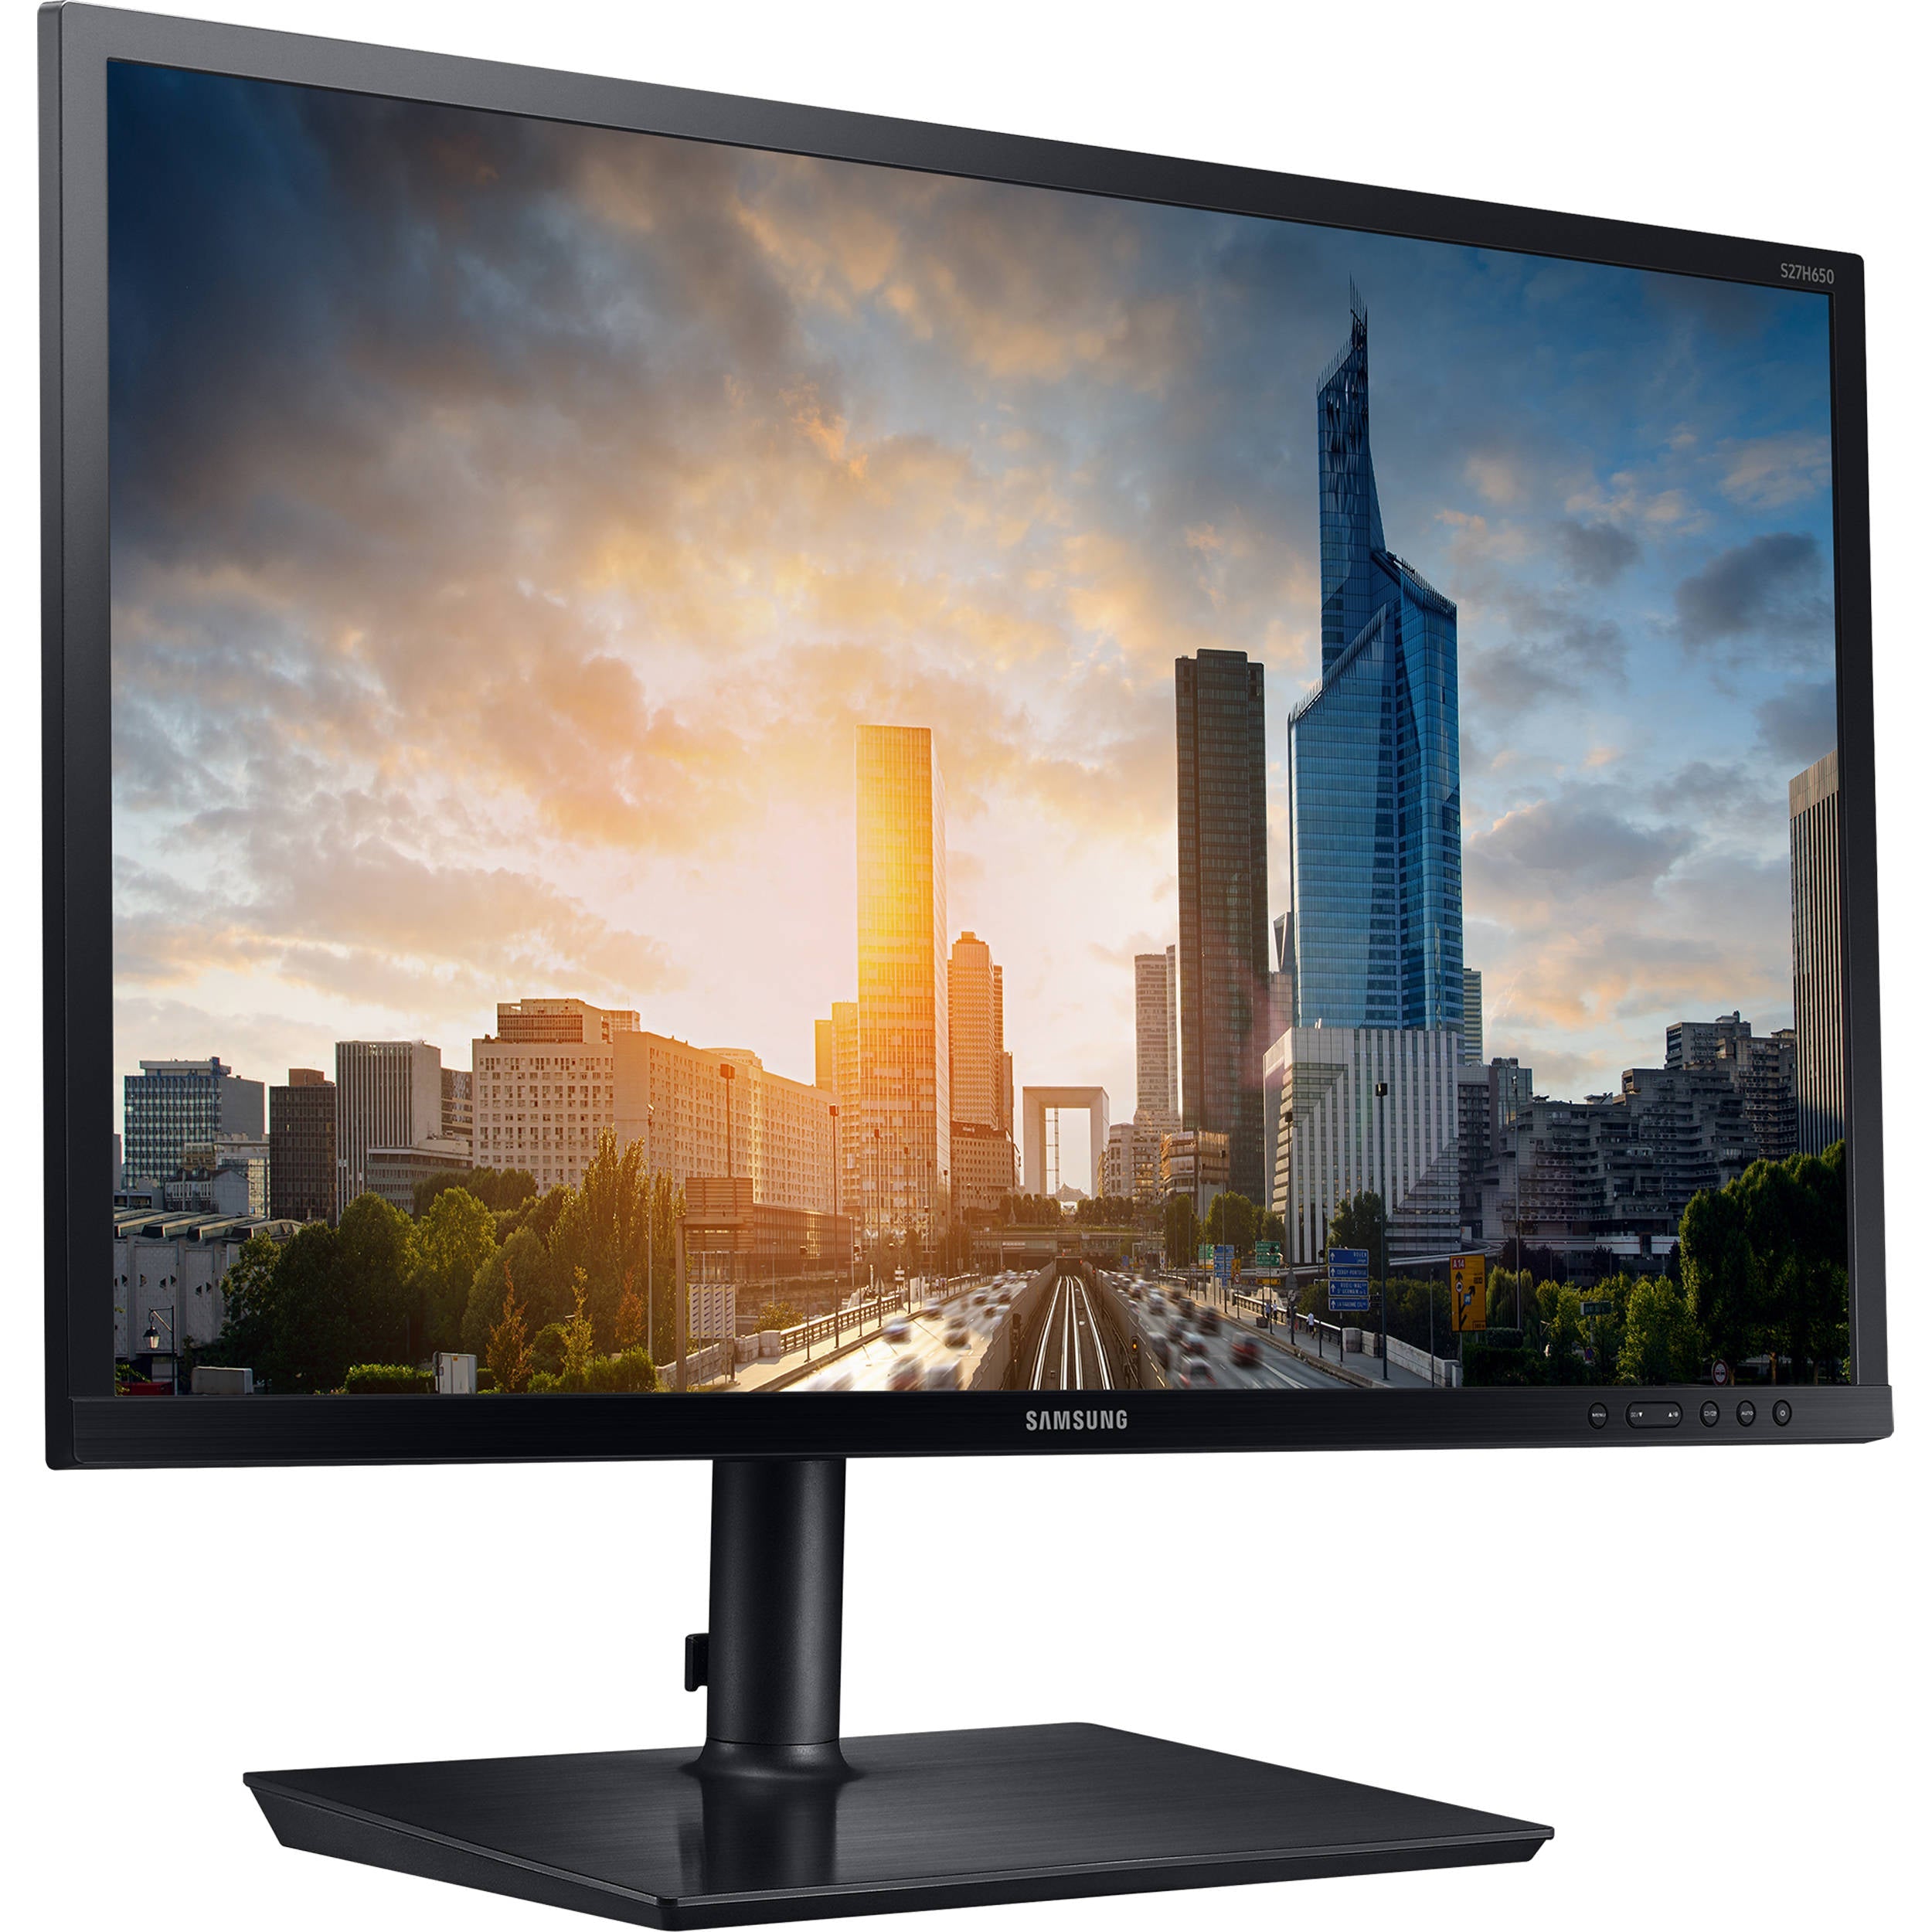 Samsung LS27H650FDNXZA 27" SH650 Series 1920 x 1200 60Hz LED Monitor for Business - Certified Refurbished